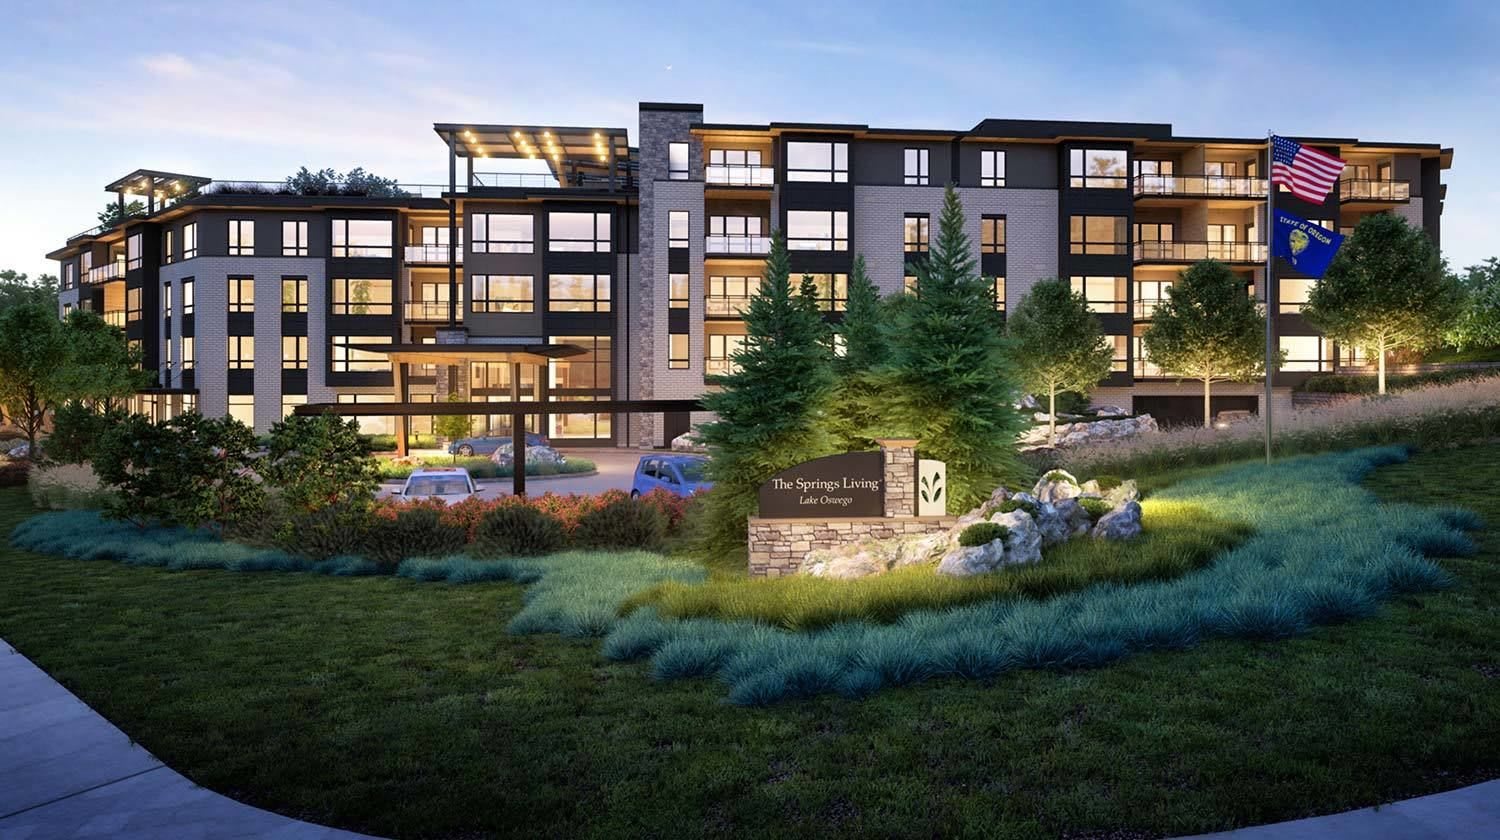 The Springs at Lake Oswego community exterior